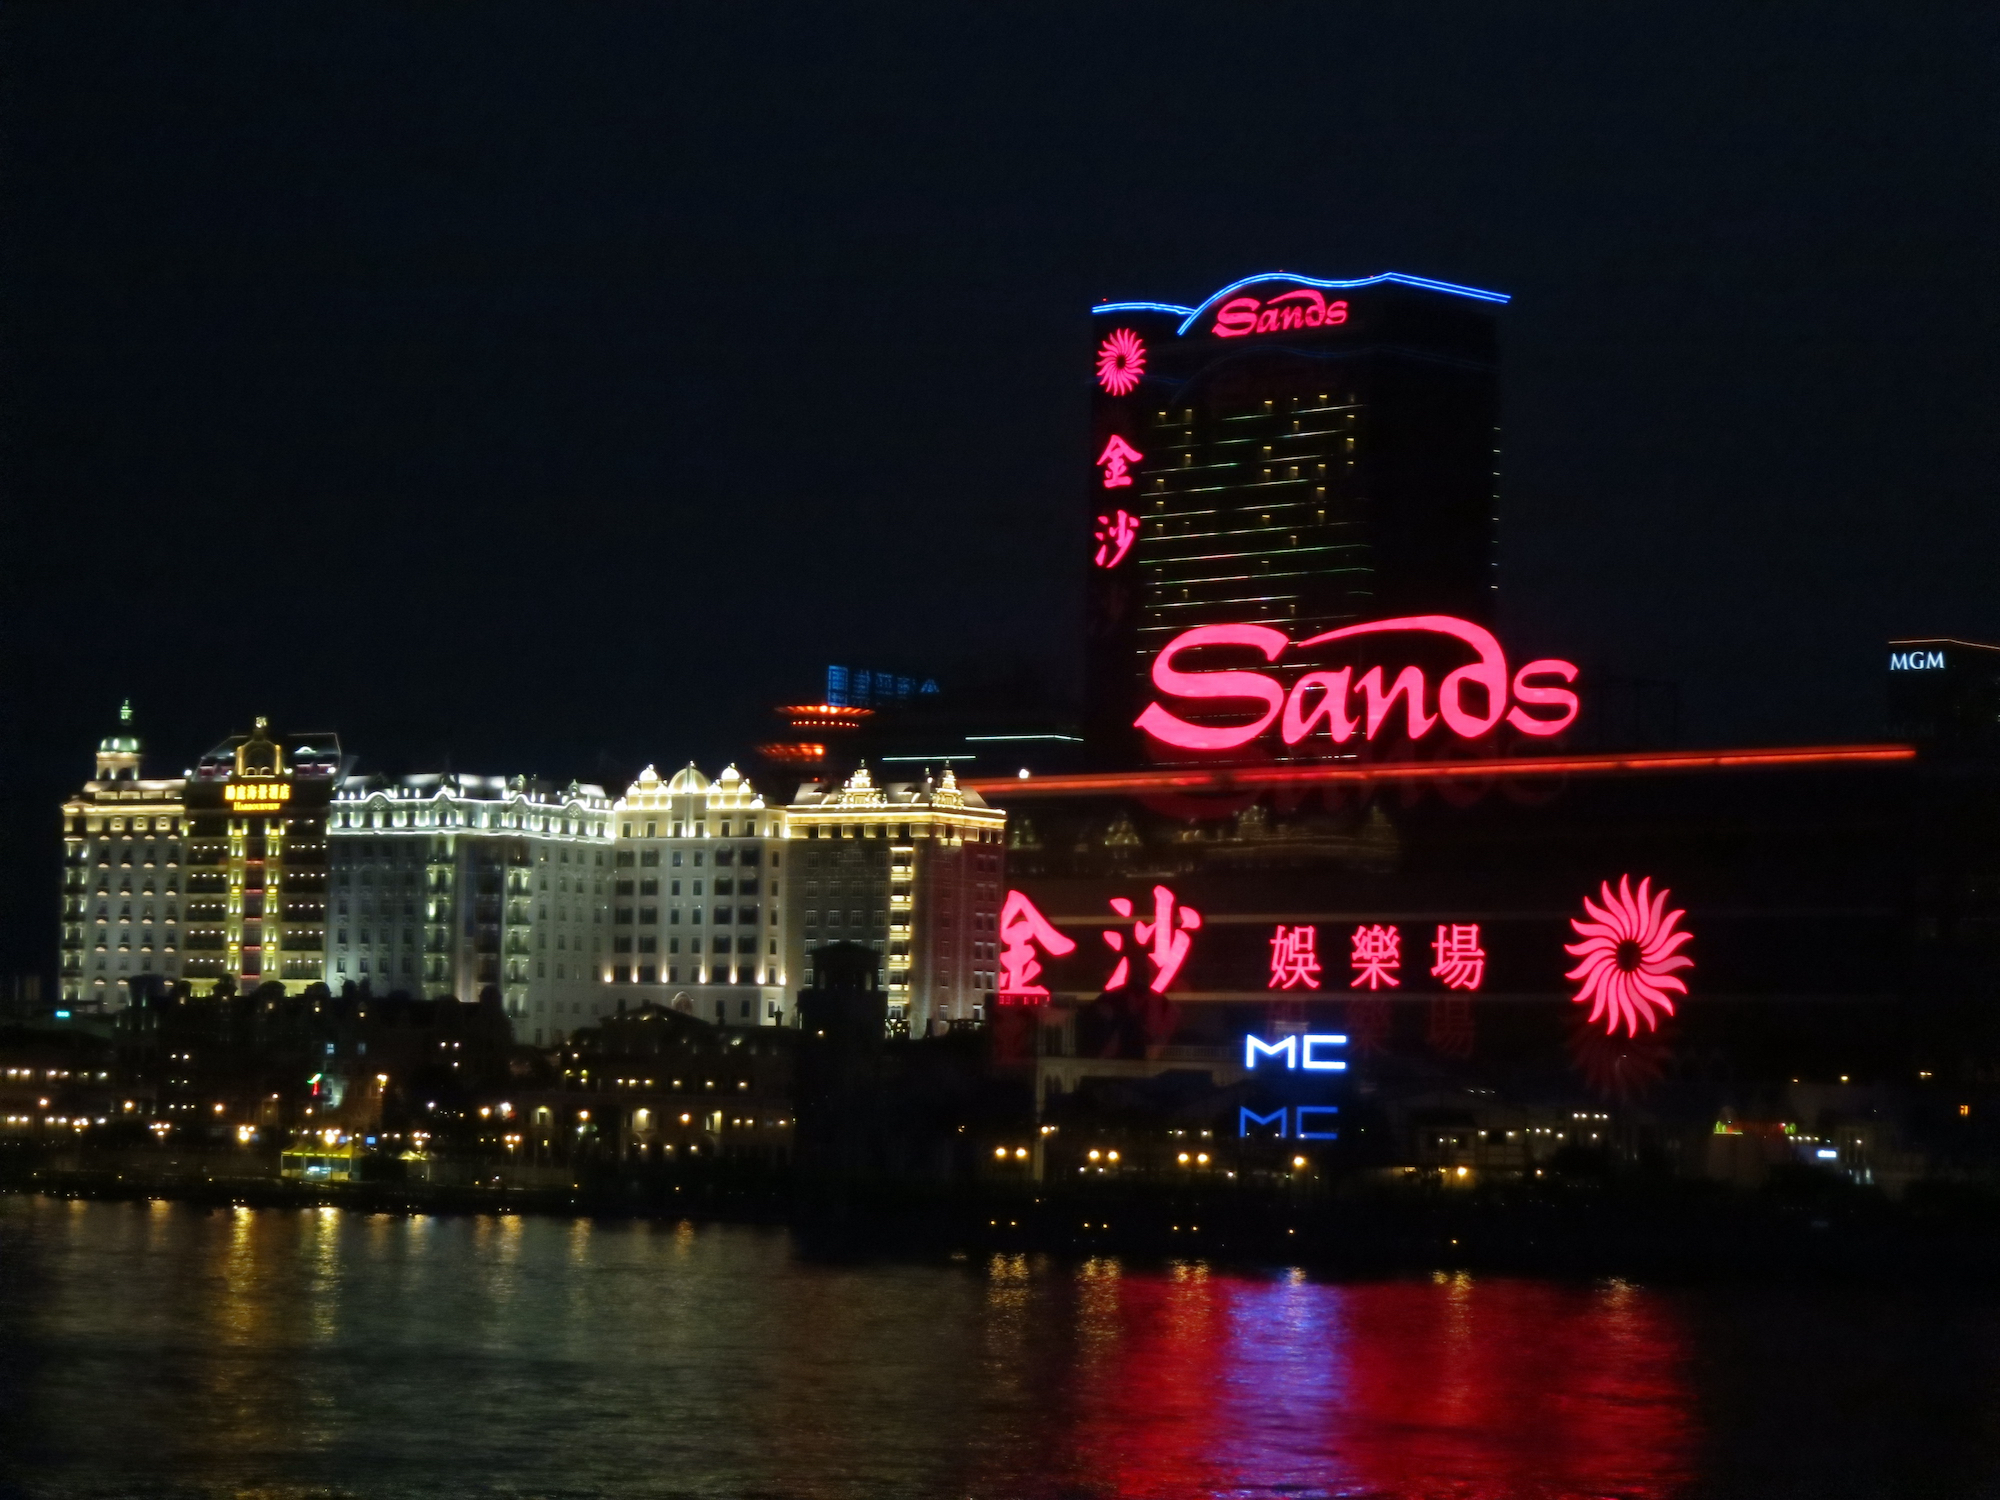 Las Vegas Sands increases its stake in Sands China